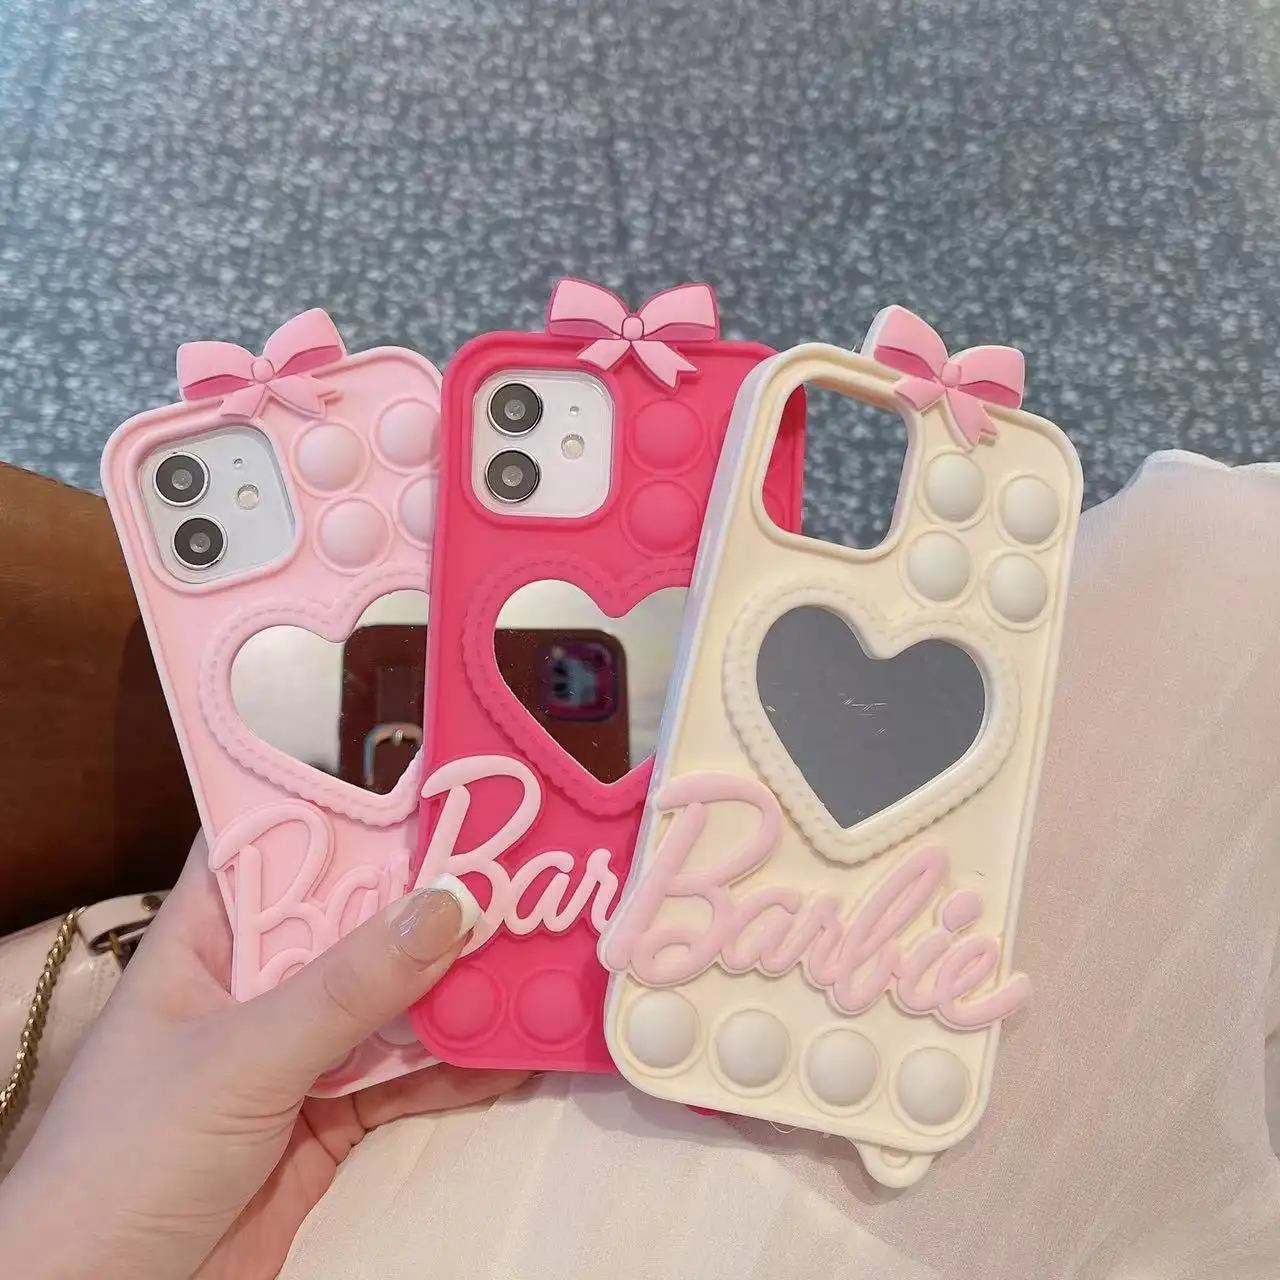 Antiman Fun love mirror Silicone cute phone cases for Iphone 12 13 phone shell silicone 14 pro Max mobile phone accessory